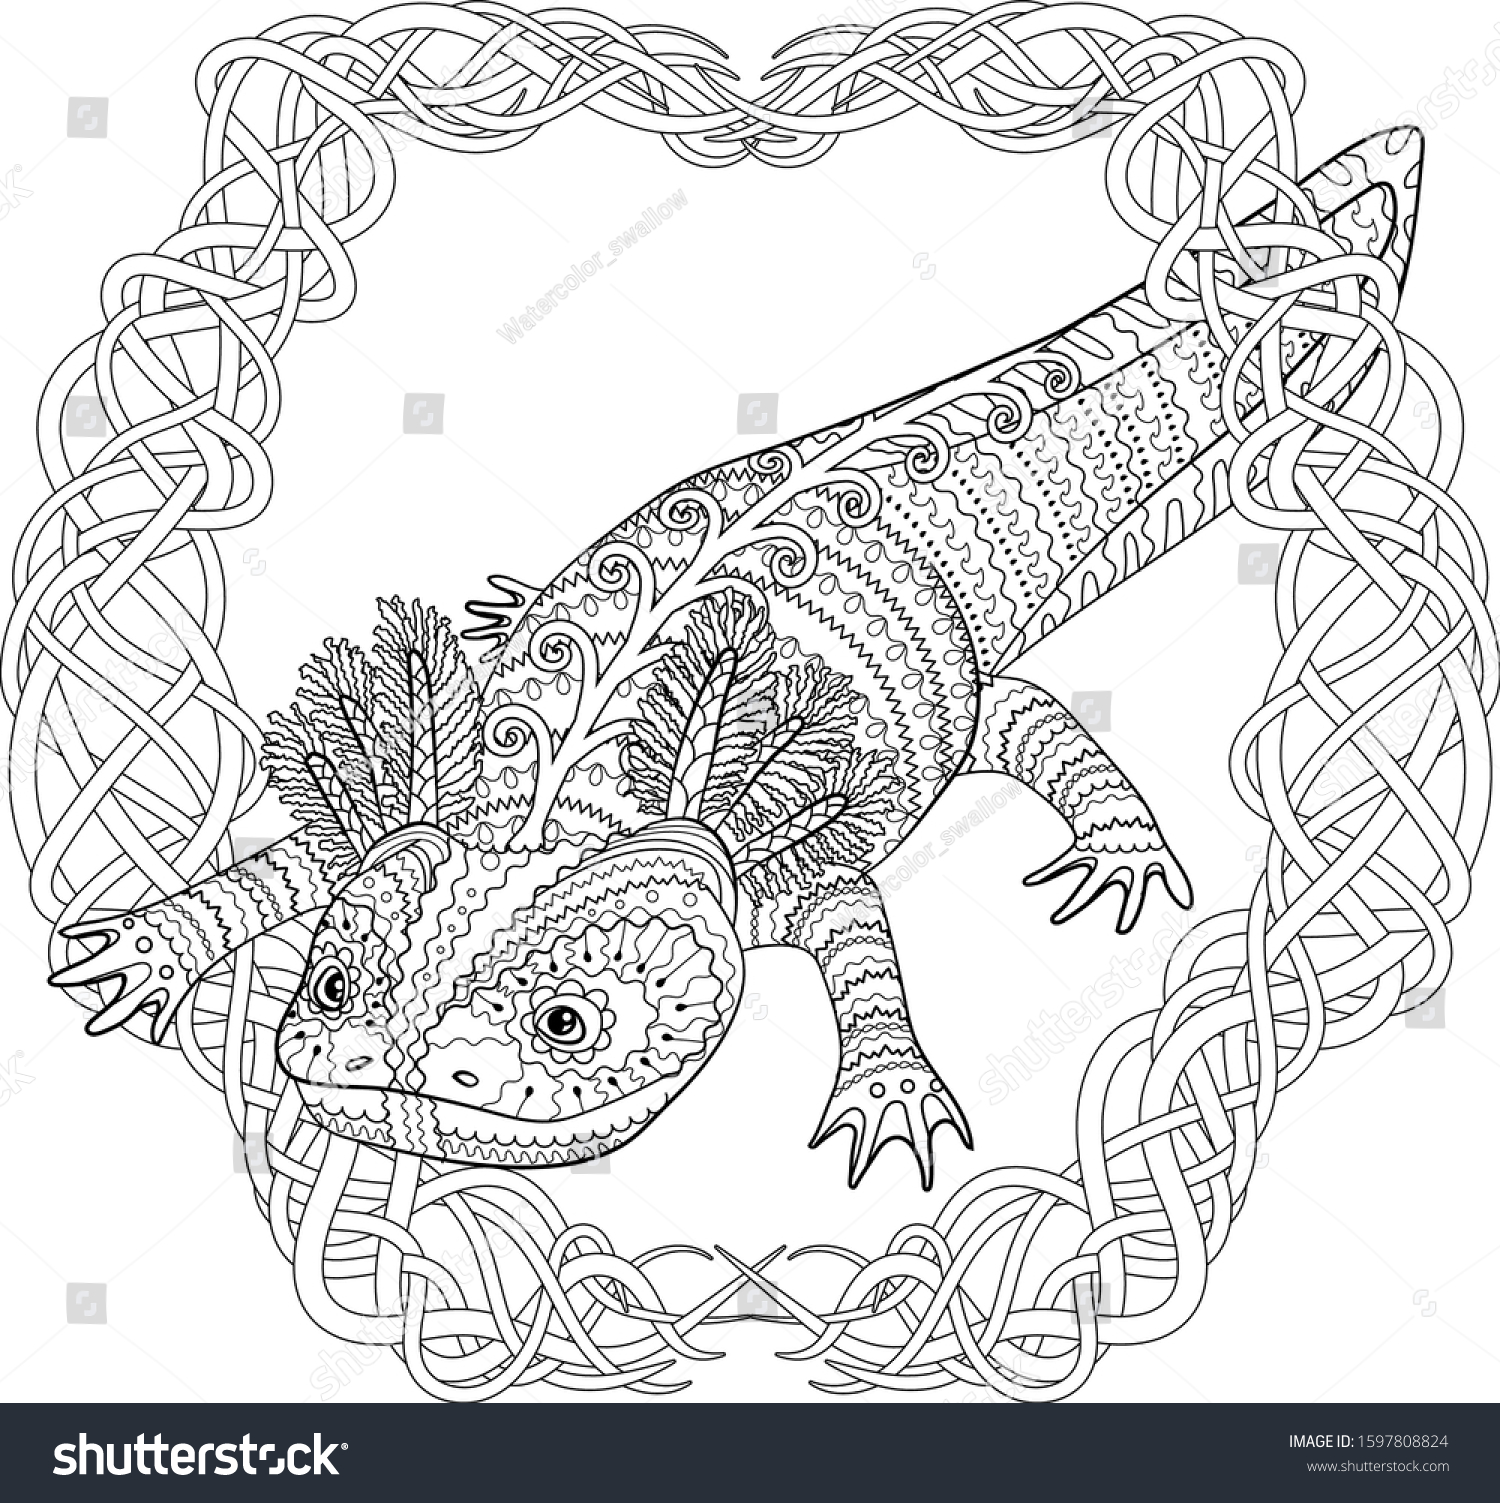 Coloring Page Adults Cute Axolotl Patterned Stock Vector Royalty ...